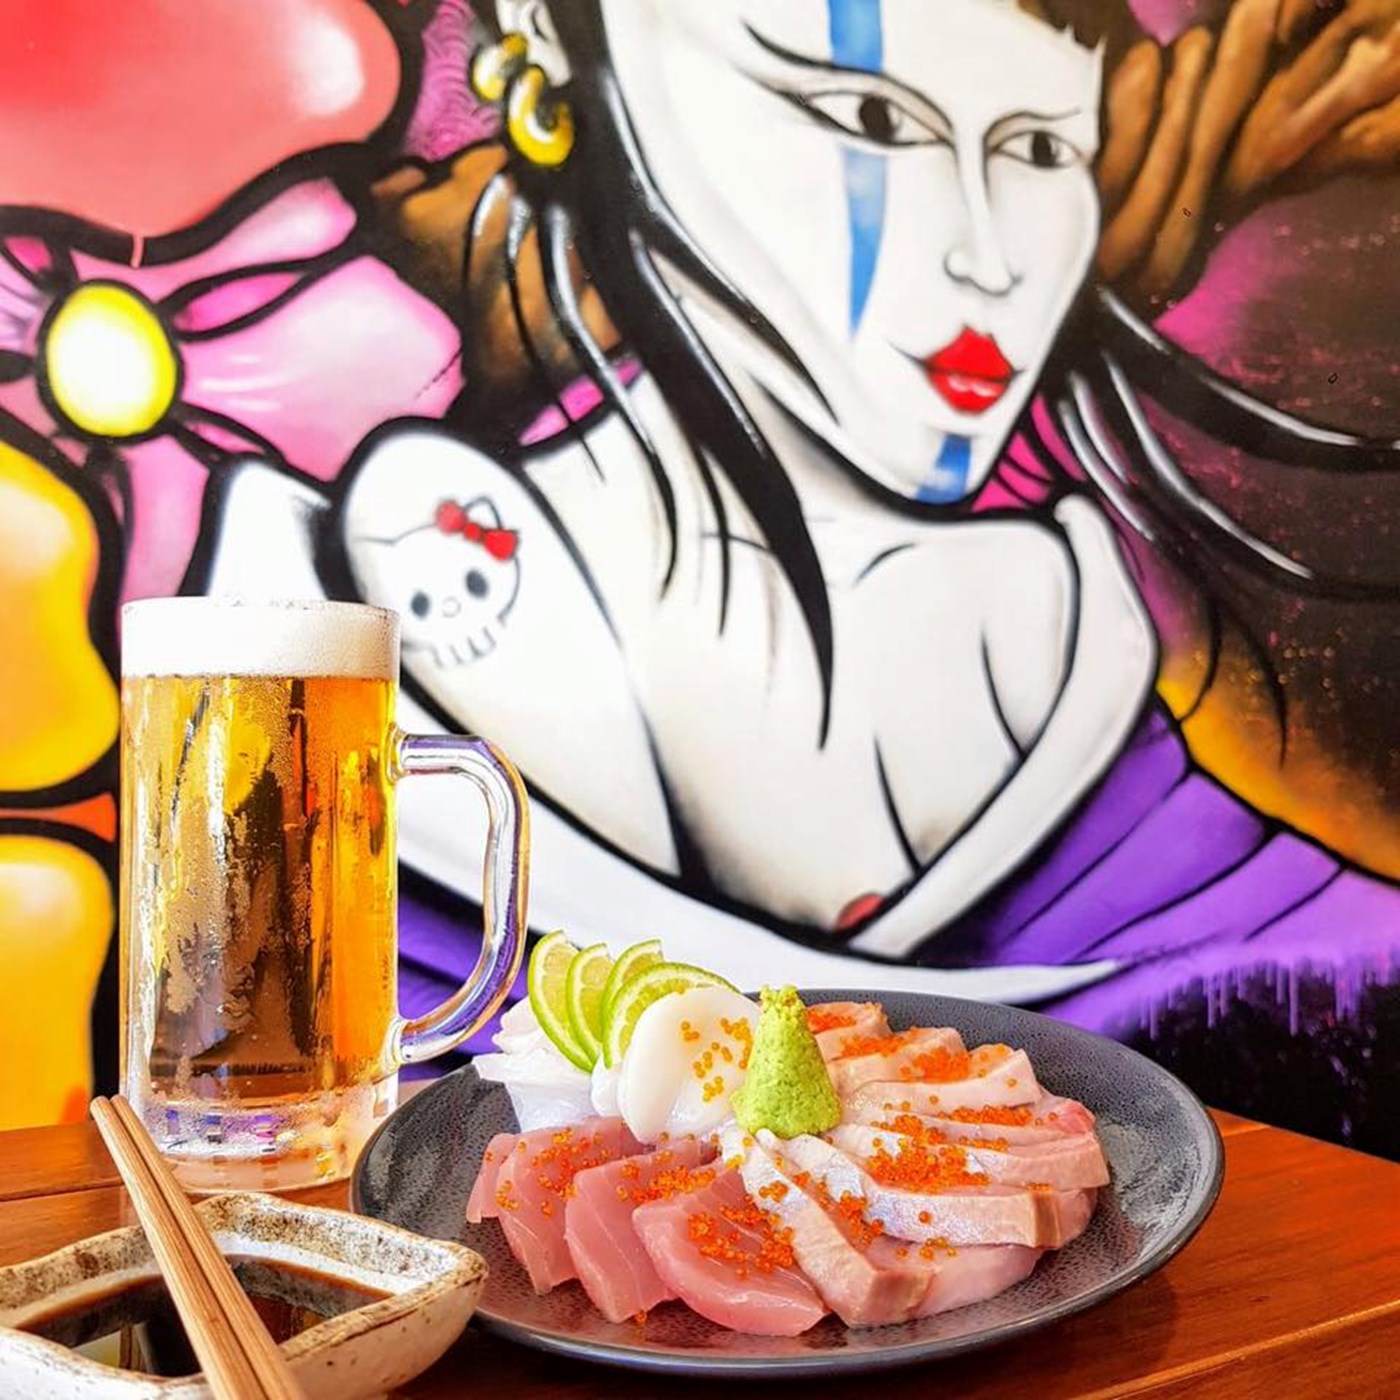 A pint of beer and plate of sashimi at Wawawa Izakaya, with a graffitied wall in the background.